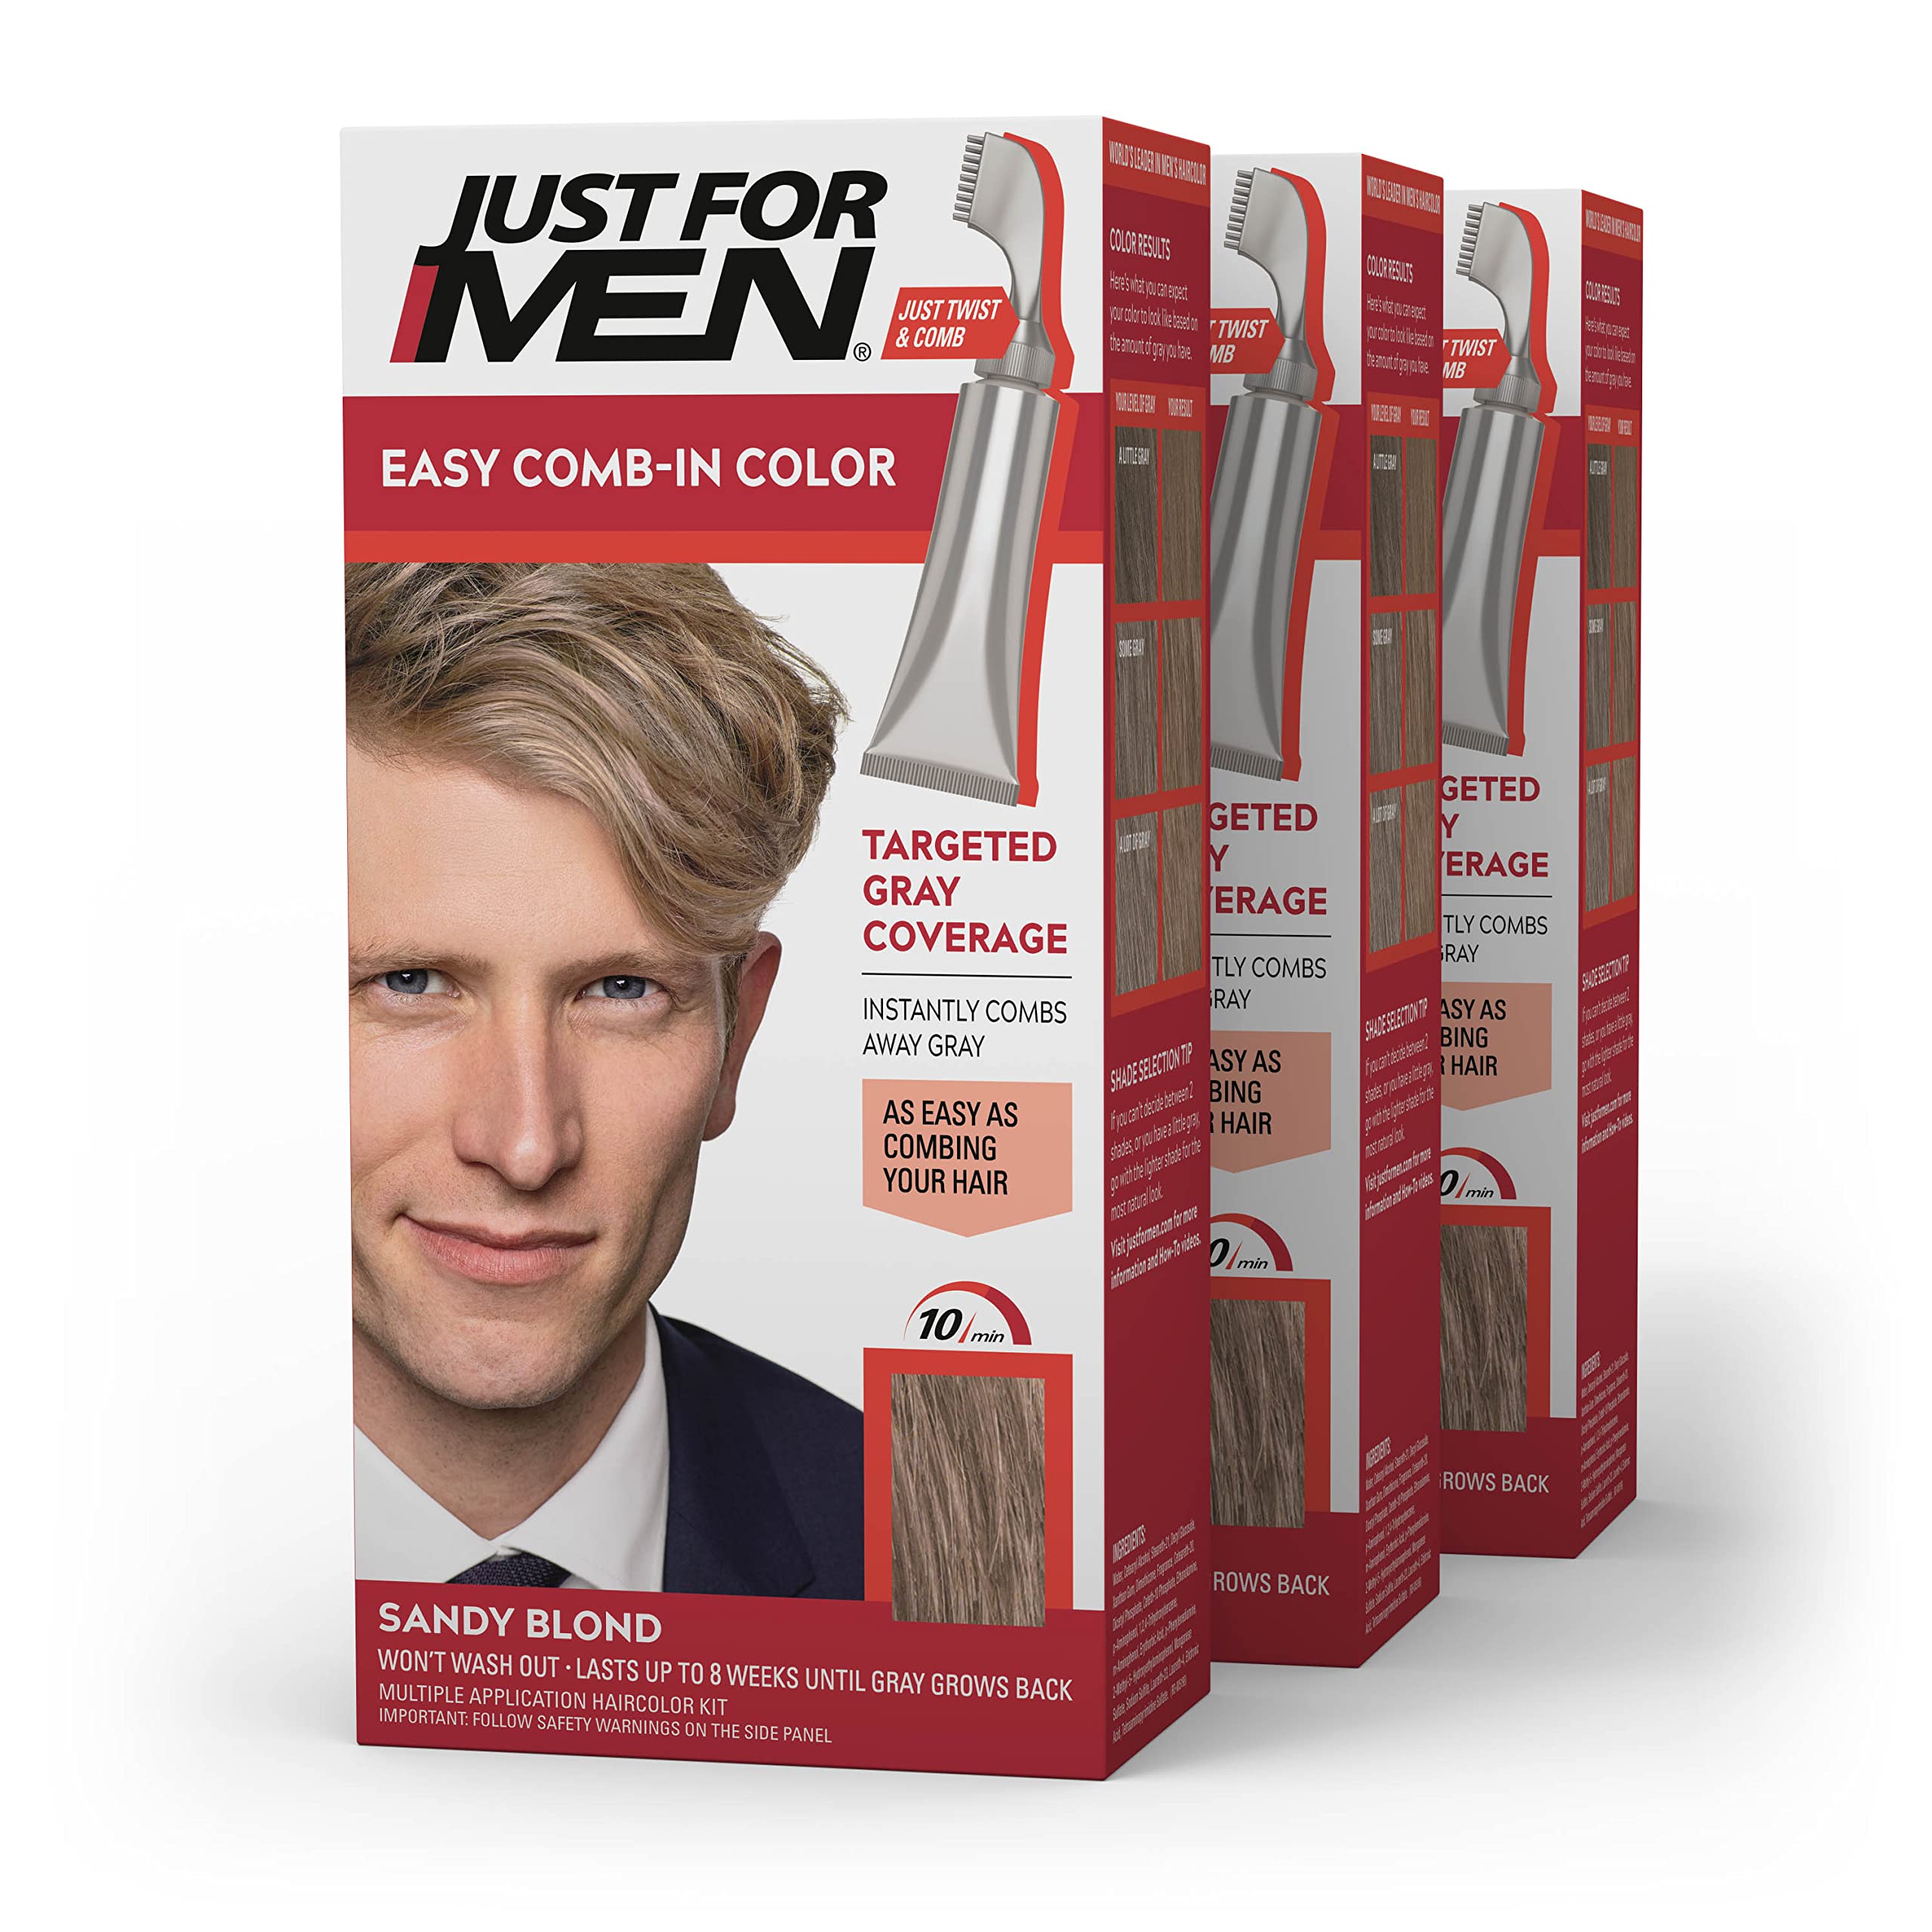 Just For Men Easy Comb-In Color (Formerly Autostop) Mens Hair Dye, Easy No Mix Application - Sandy Blond, A-10, 3 Pack